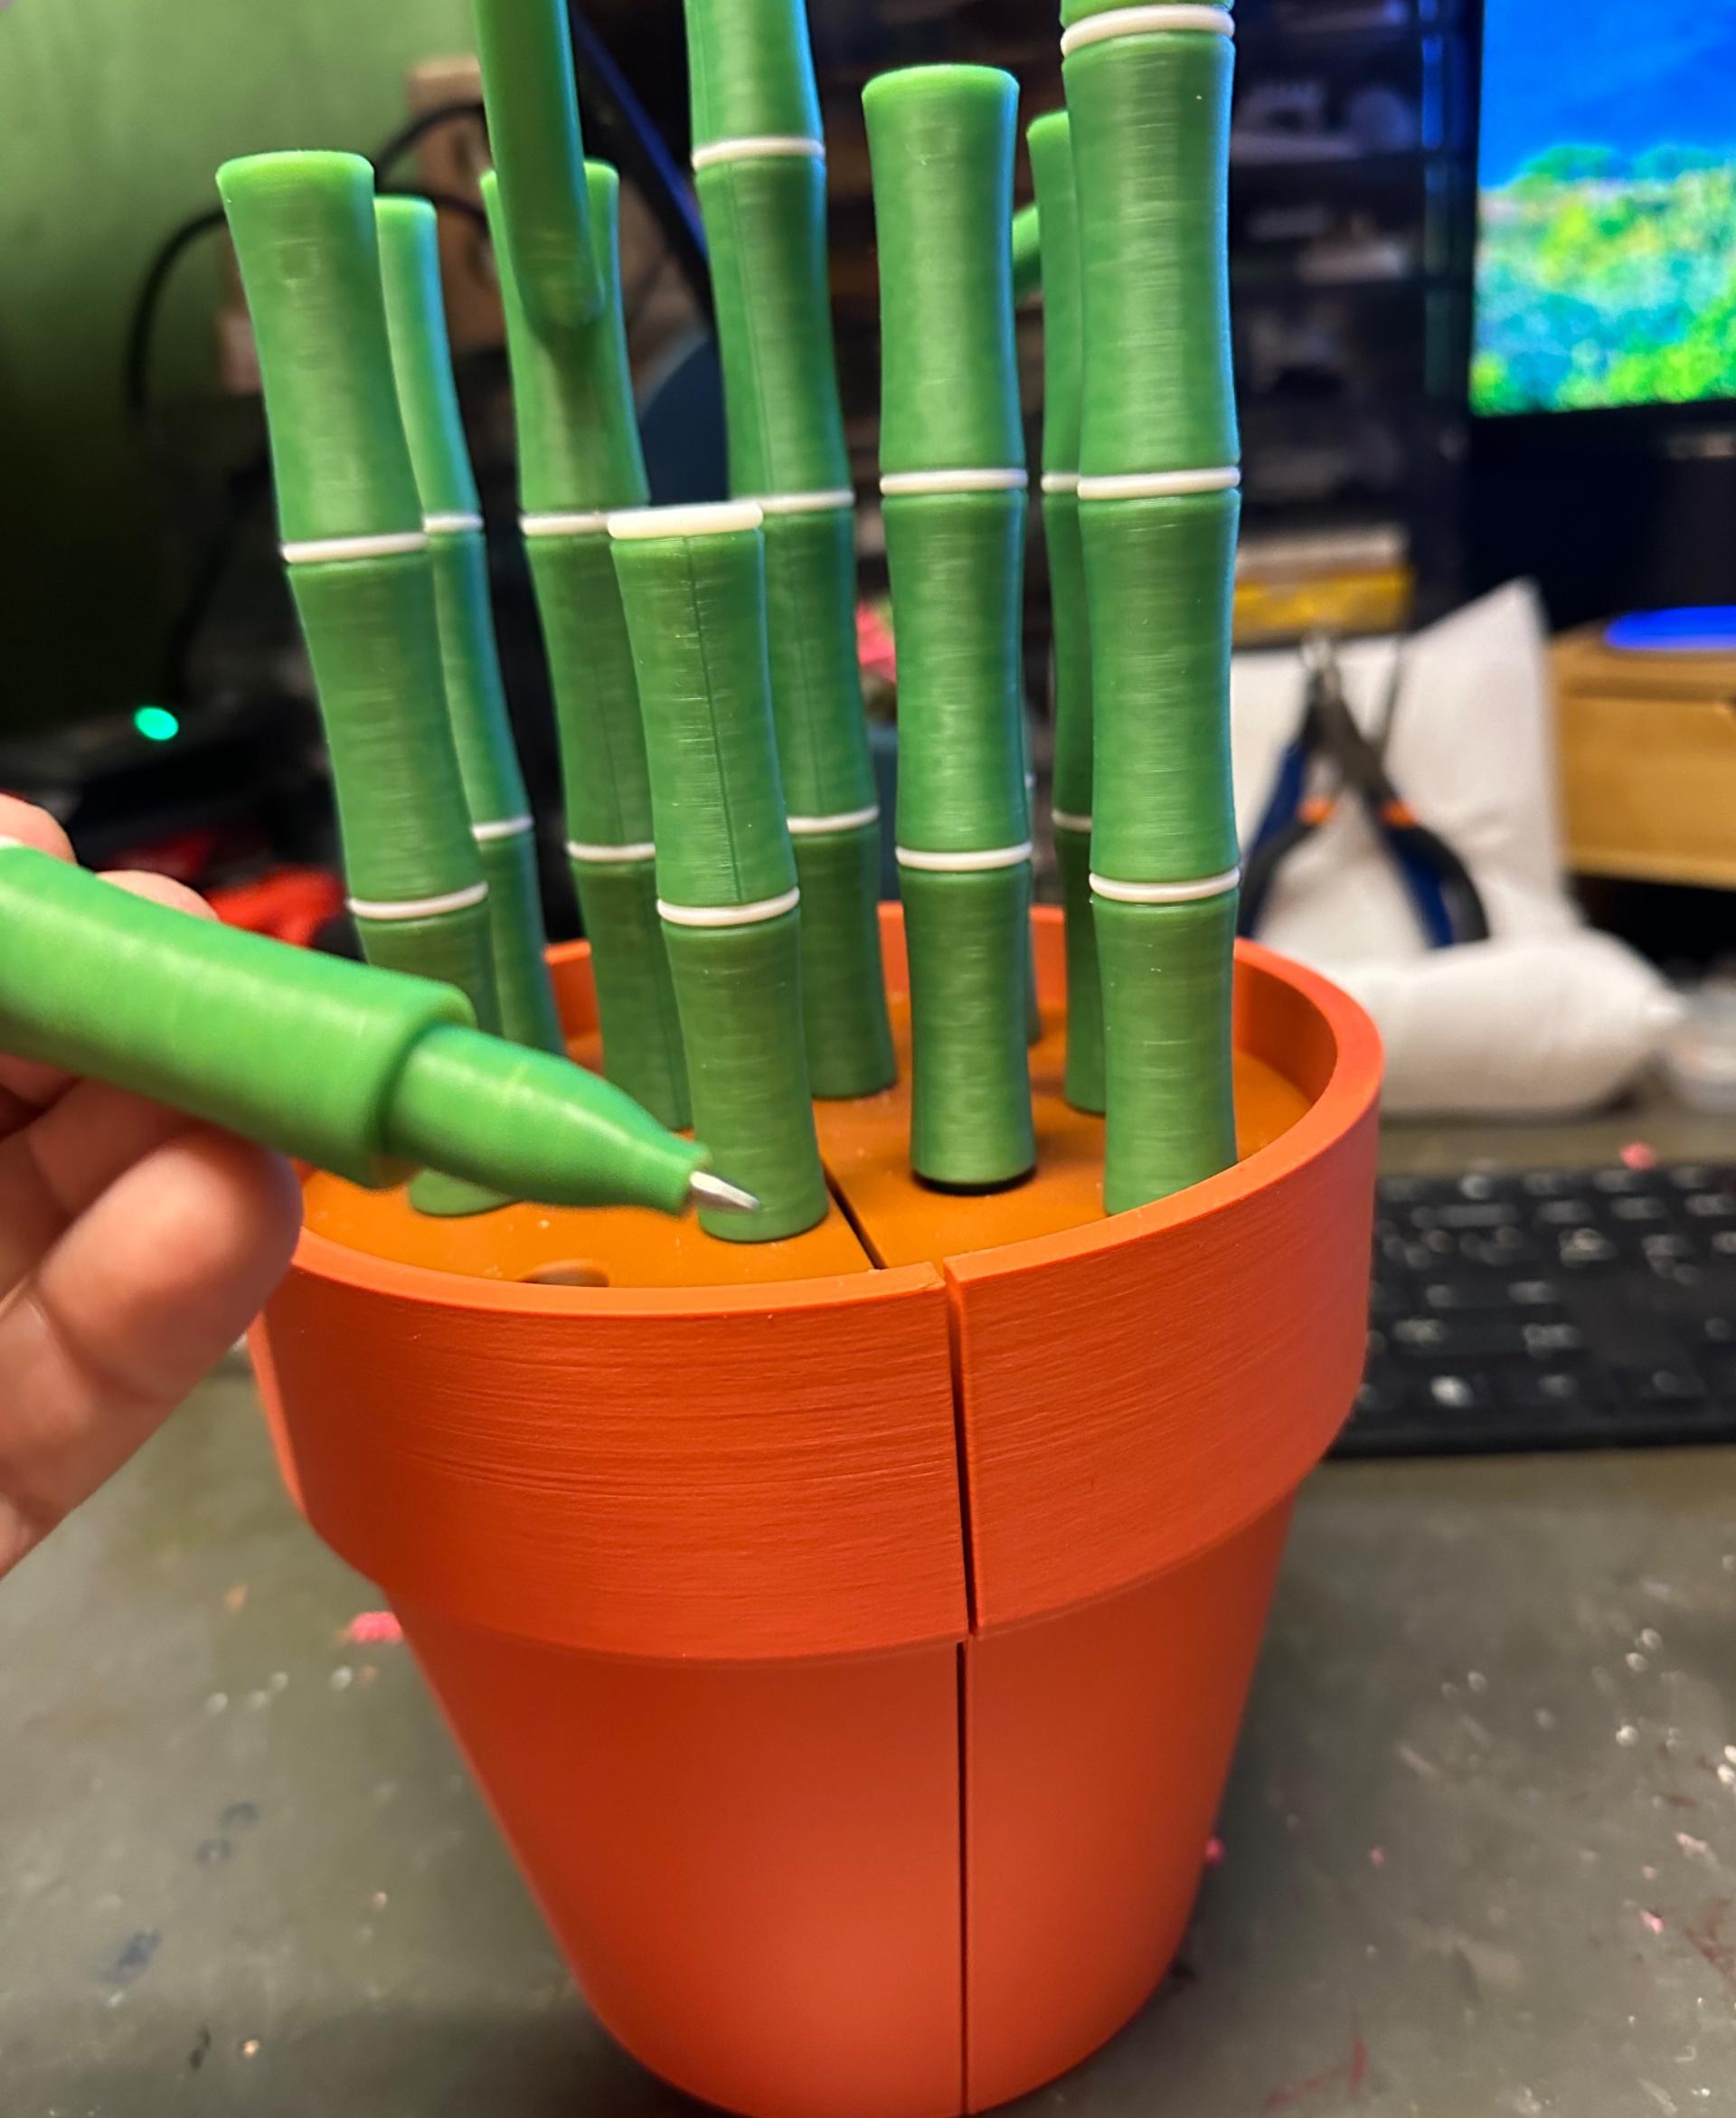 Bambookends - Bamboo Functional Plant with Pens, Highlighters, Post it note dispenser, and Bookmarks 3d model